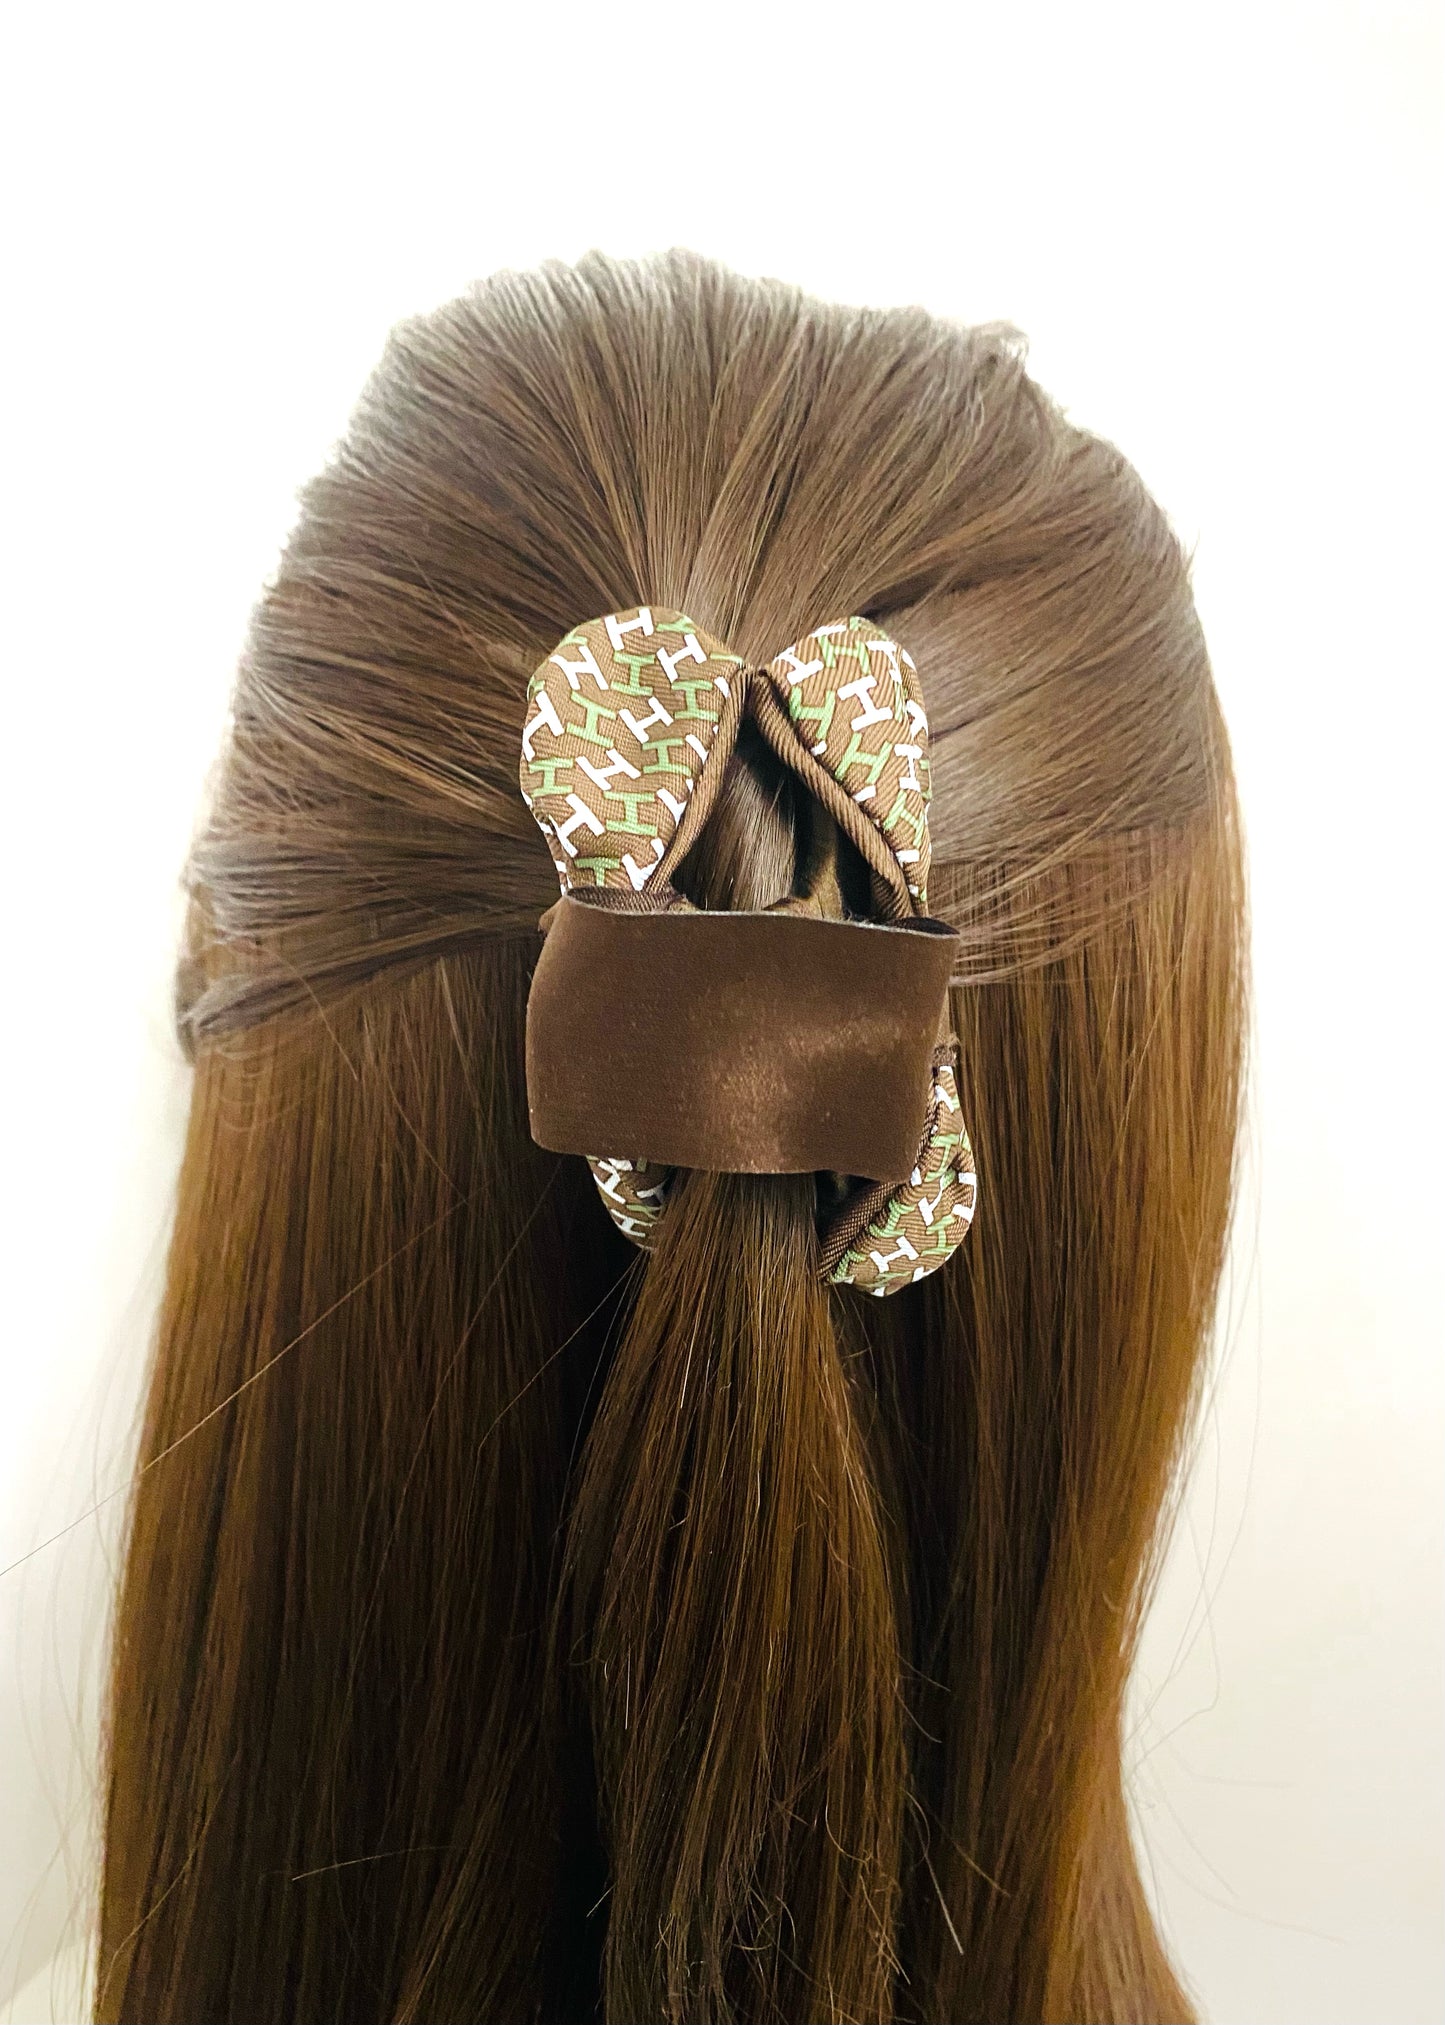 H-H0062- Chestnut with Palm & White H pattern- Double Ribbon Big Shark Clip